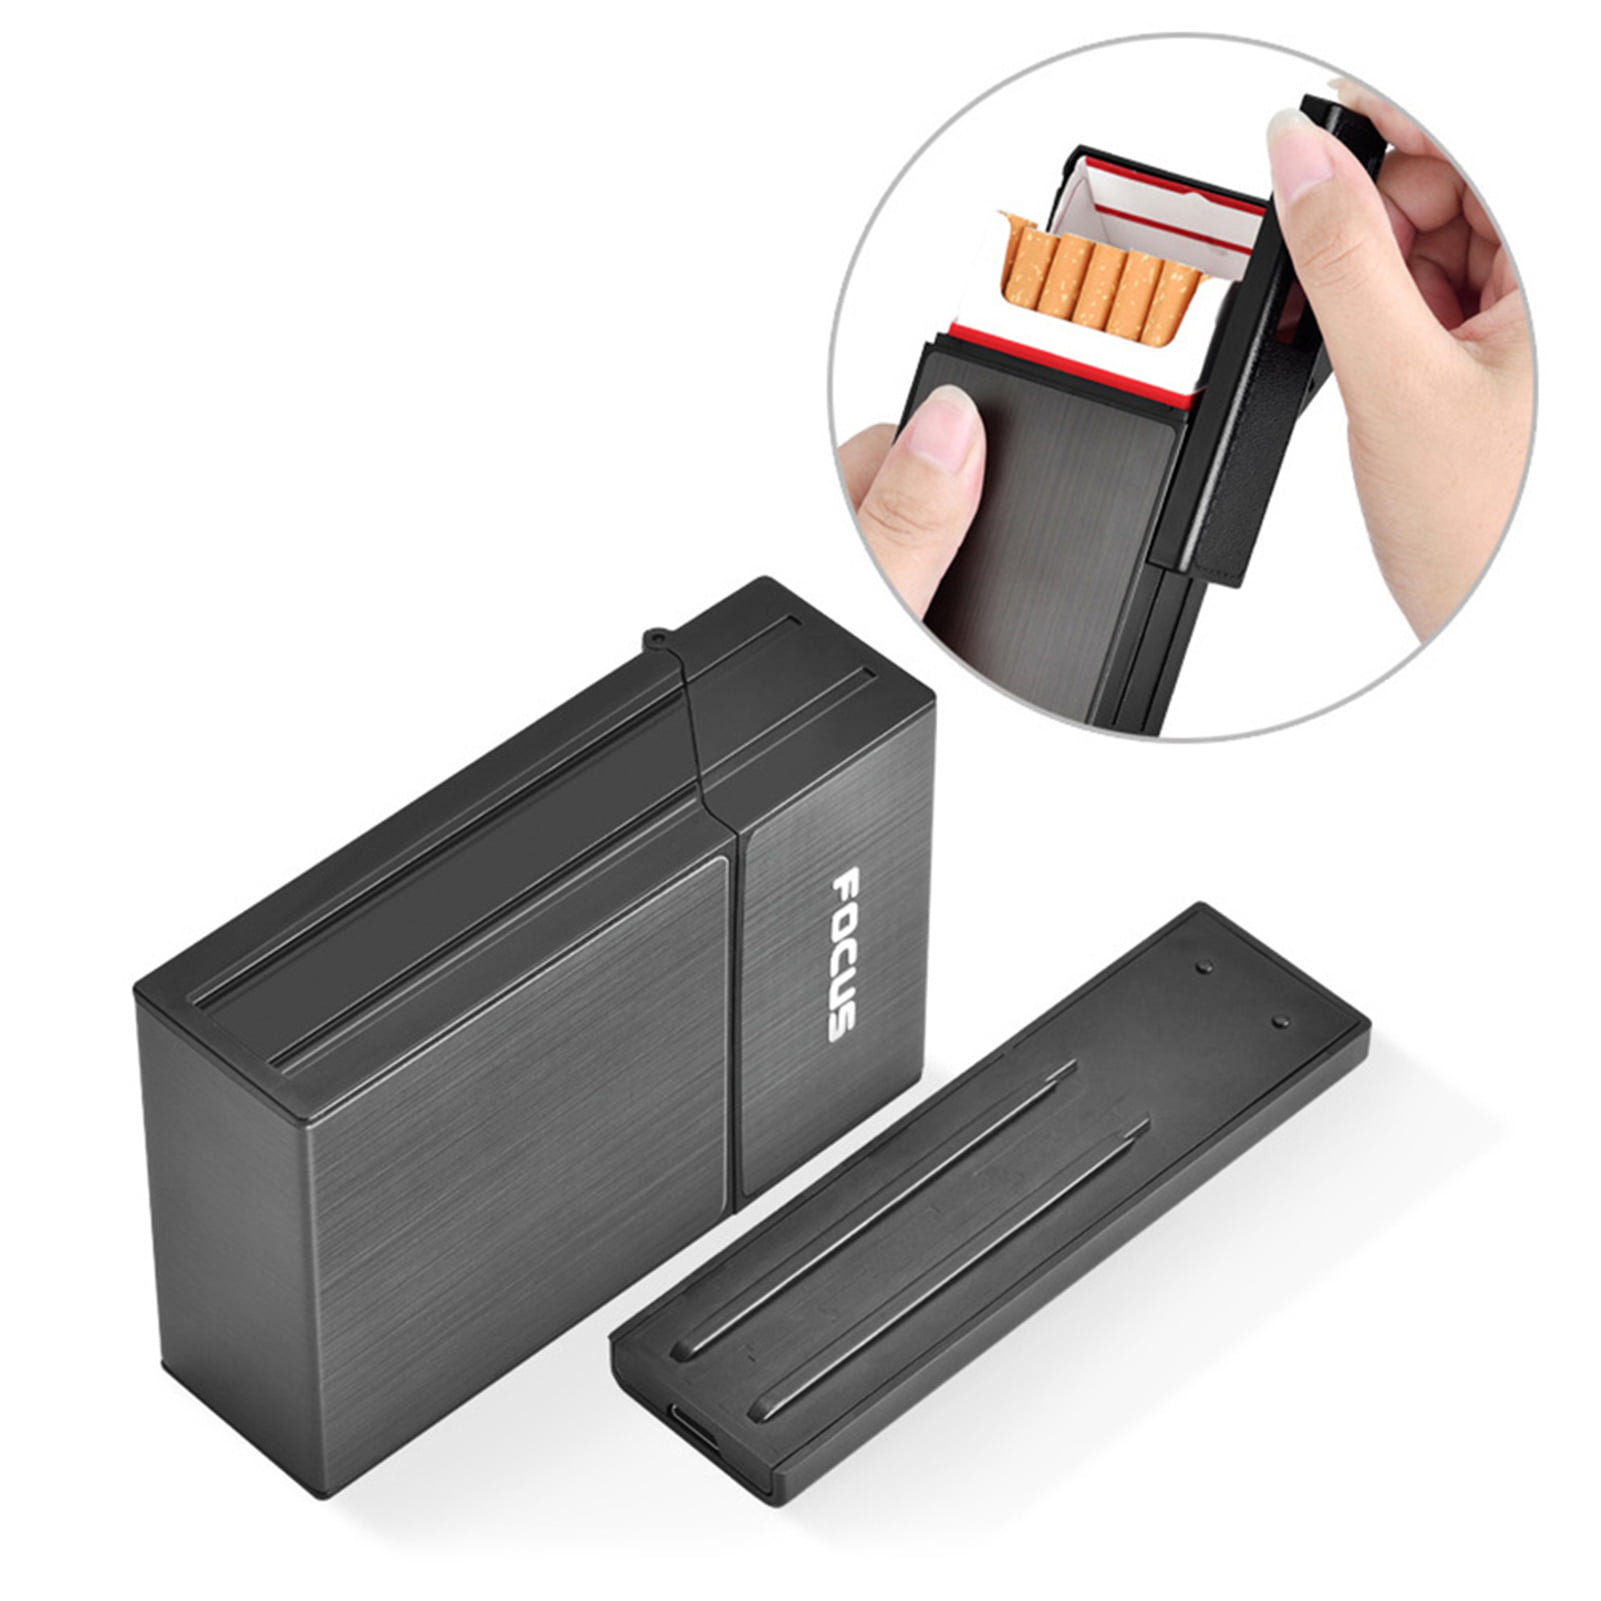 WAKE 10 Magnetic Can Cooler with Detachable Cigarette and Lighter Holder -  (3 Pack)